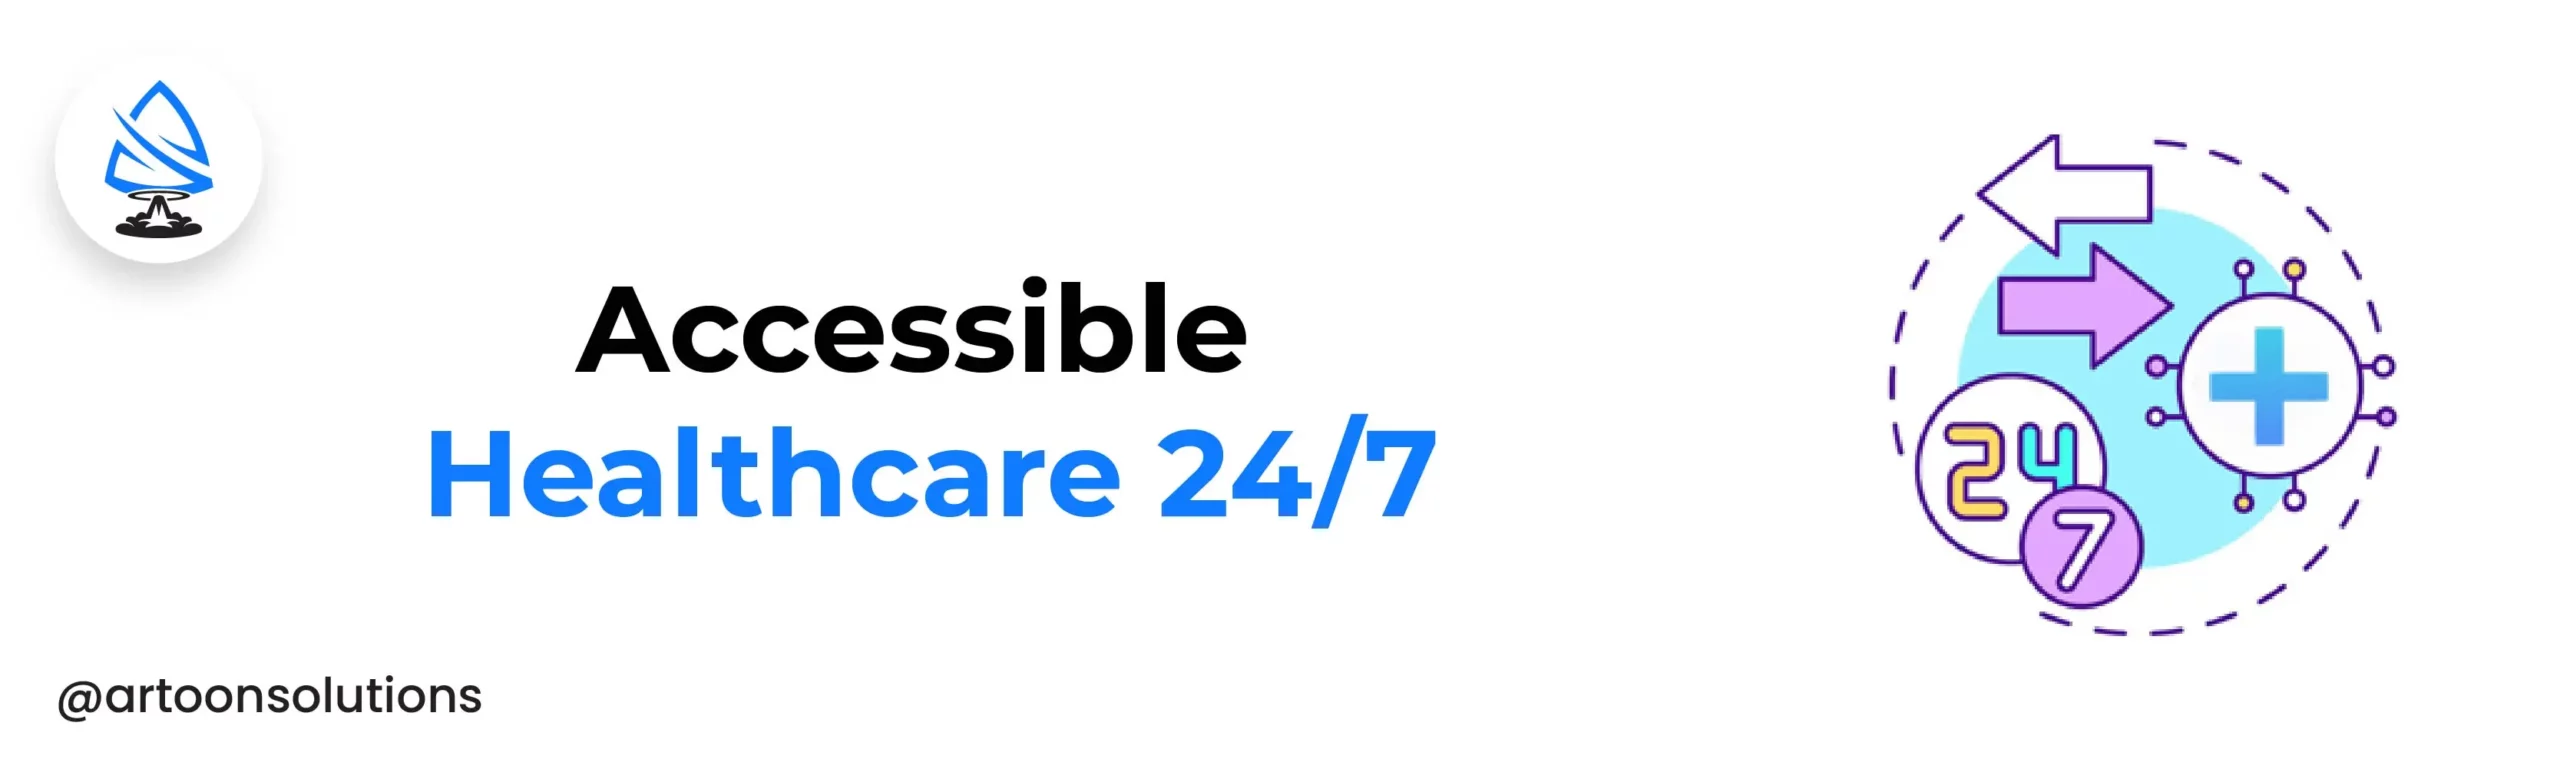 Accessible Healthcare Anytime, Anywhere